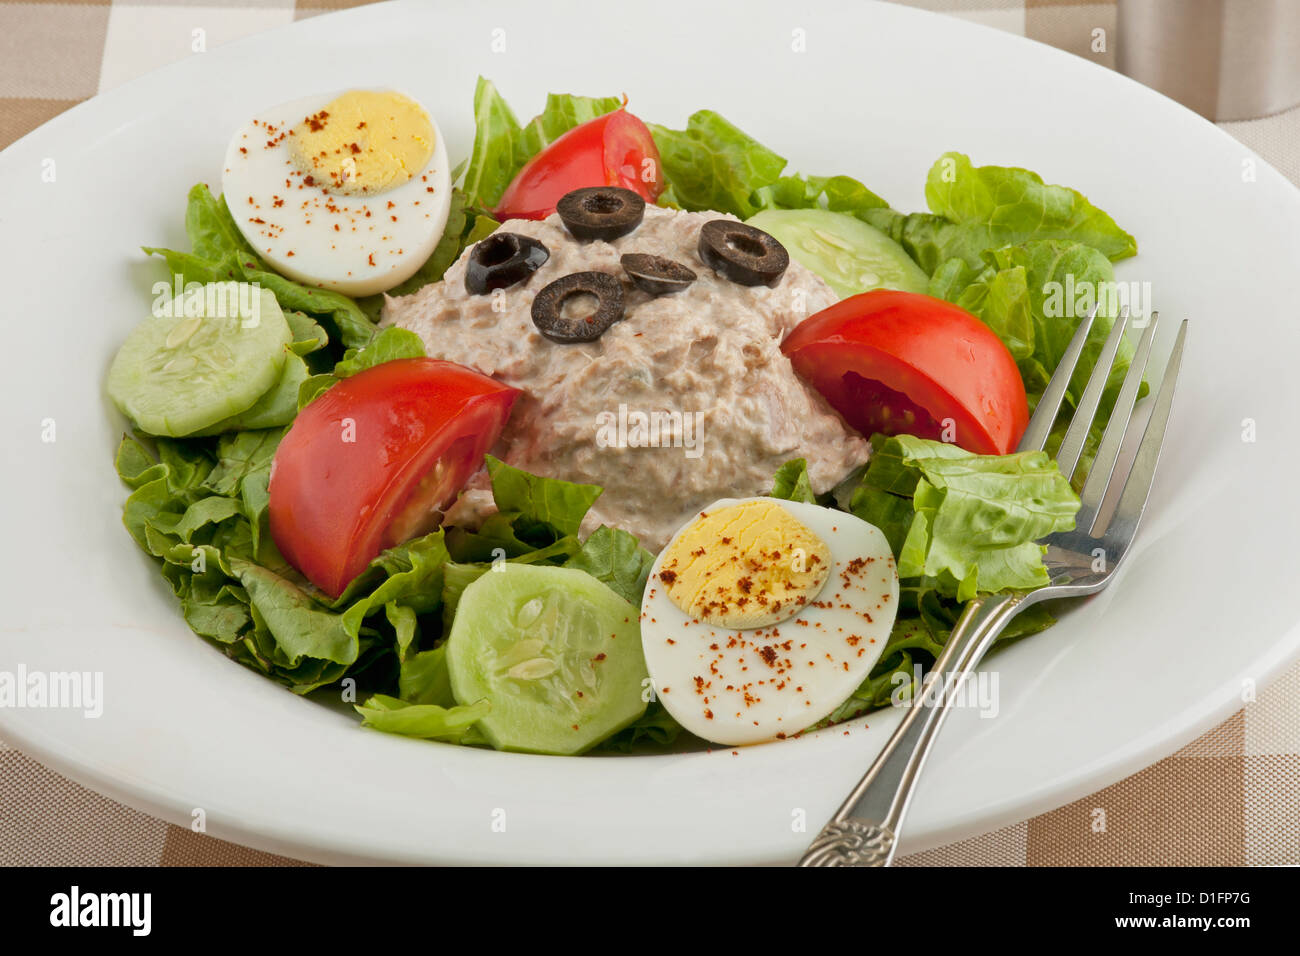 Tuna salad with vegetables and a hard boiled egg Stock Photo